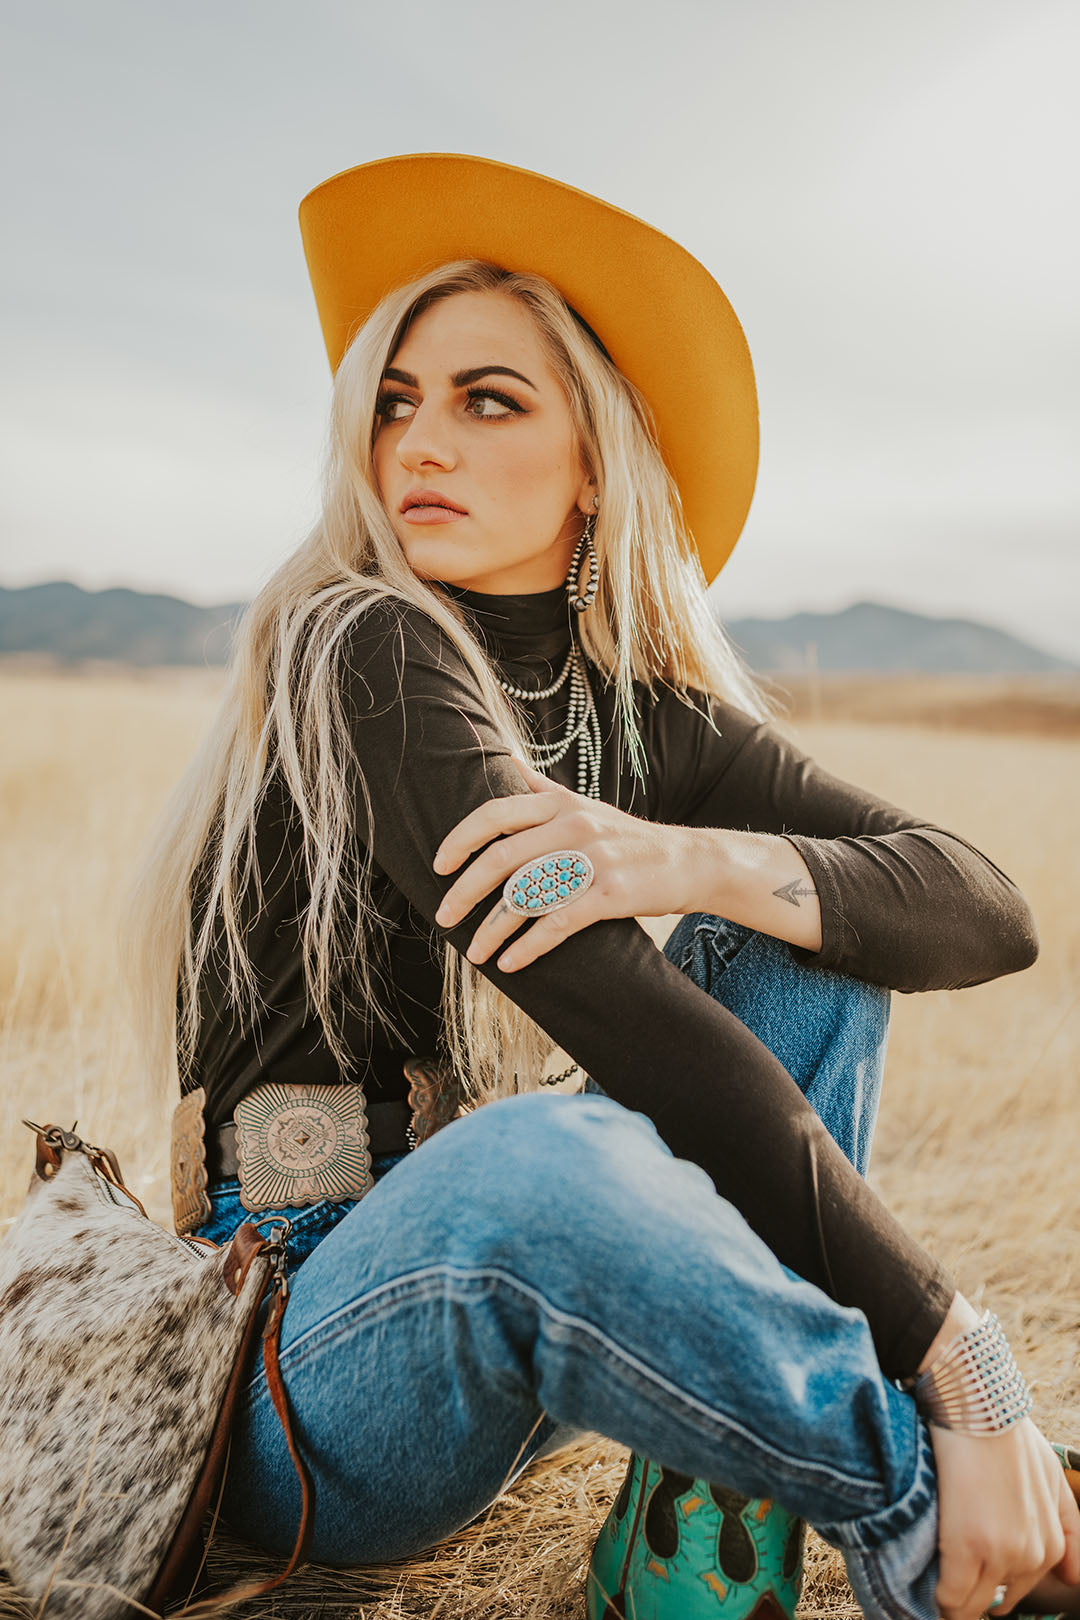 GIrl sitting in field wearing the Gold Digger Yellow Cowgirl Hat by Charlie 1 Horse.